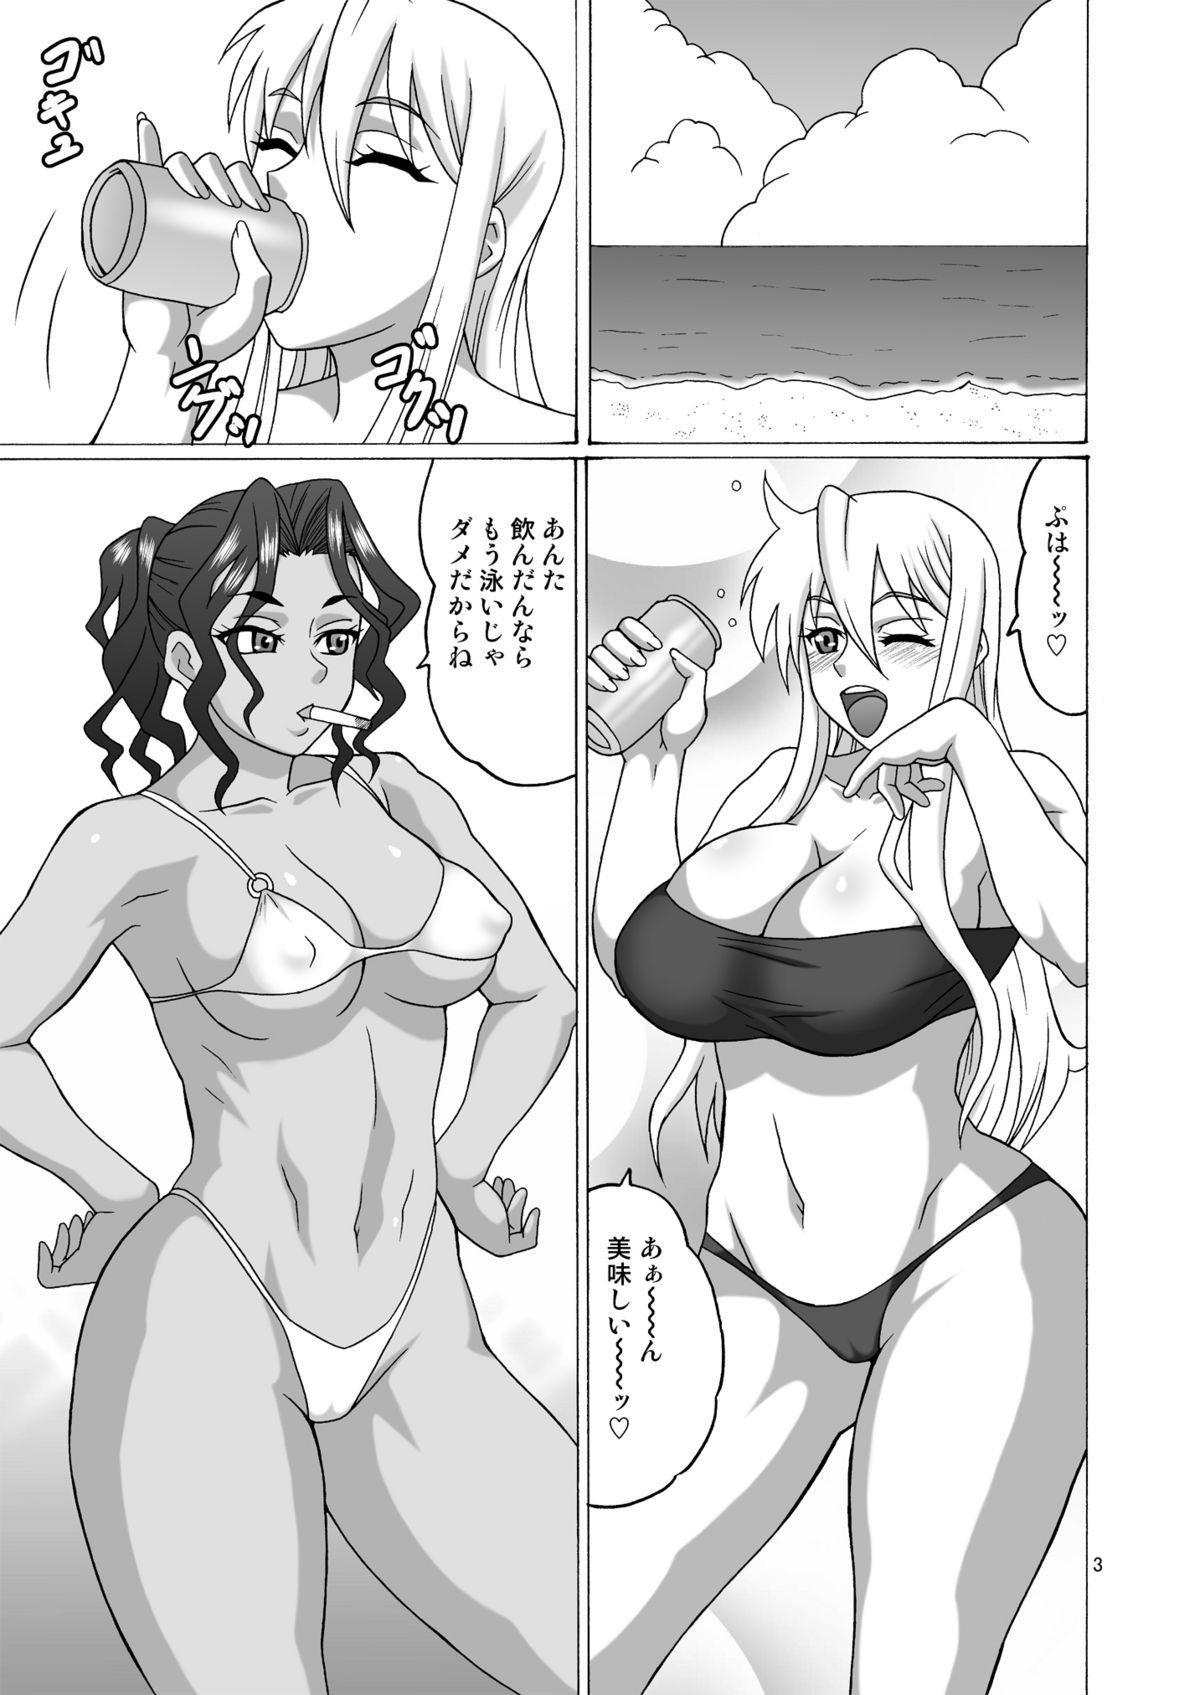 Bribe Beach no BITCH - Highschool of the dead Funk - Page 2